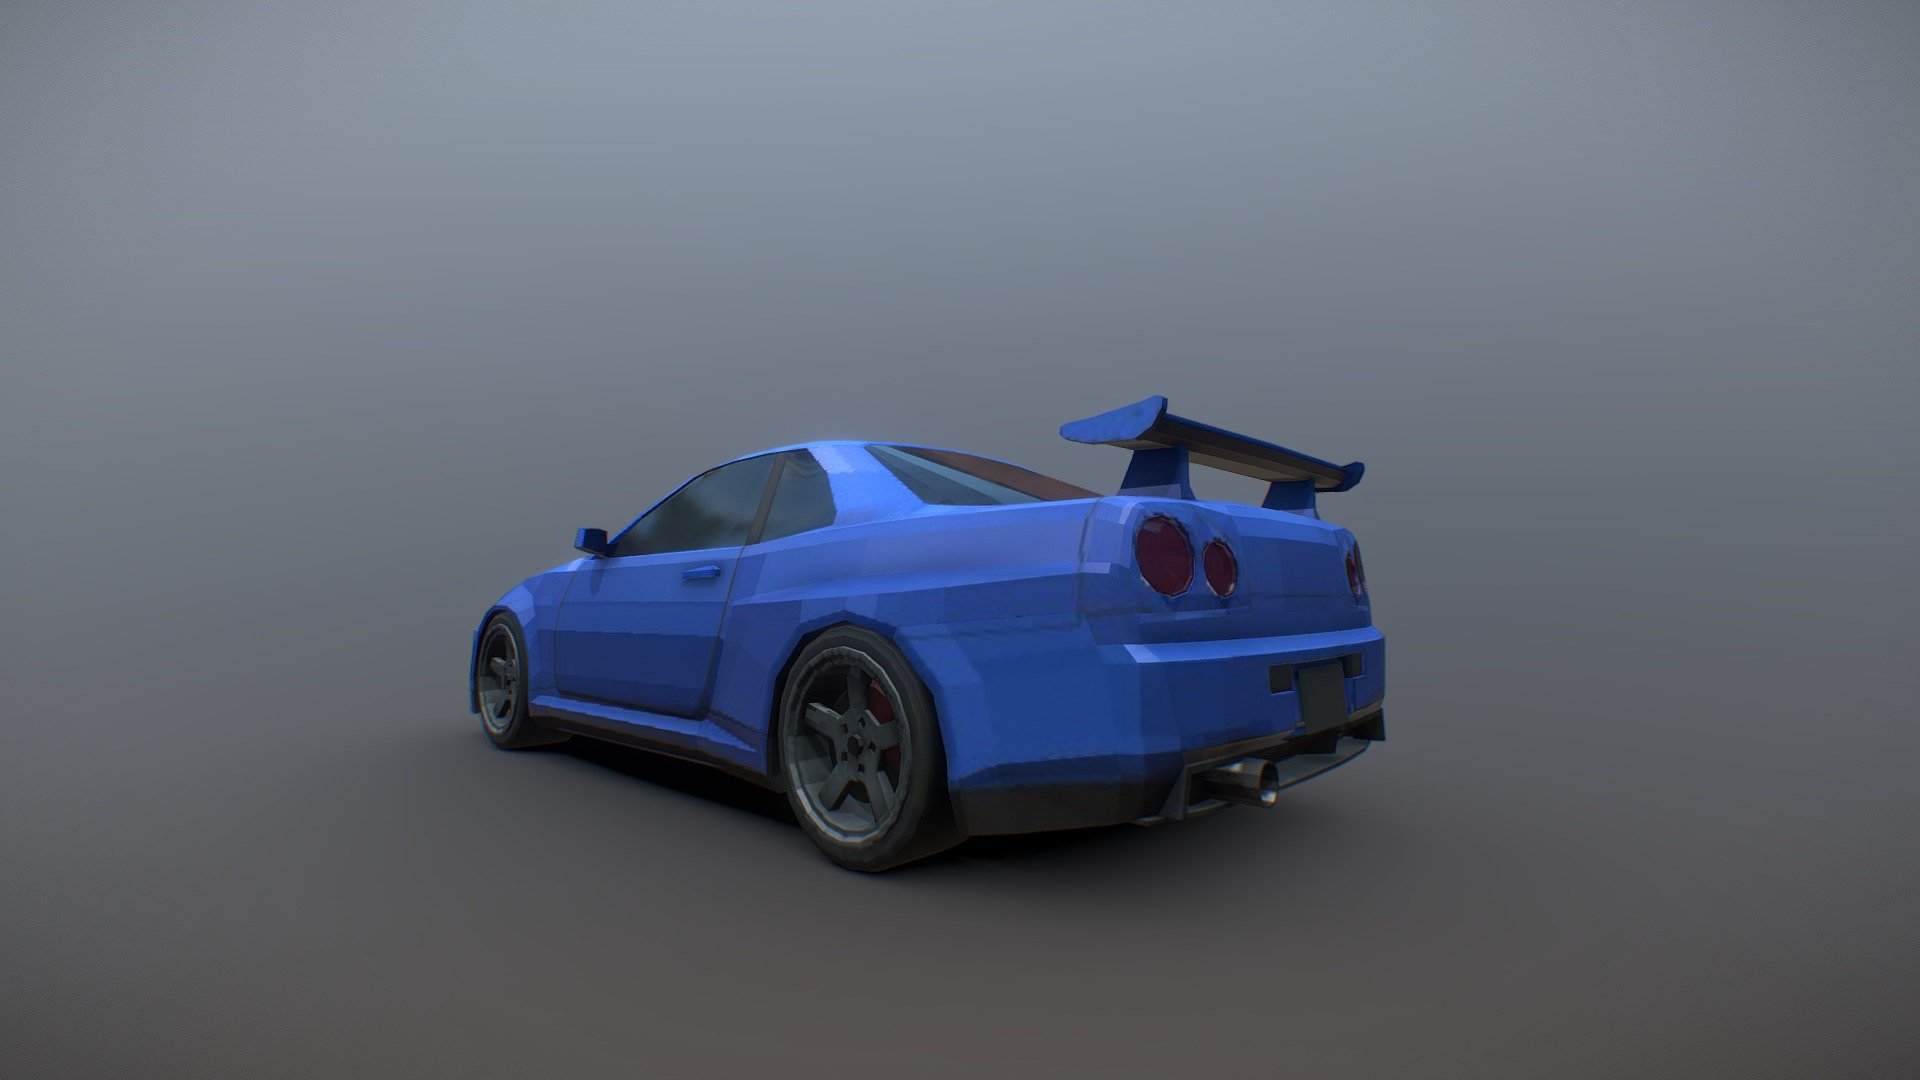 This ready-to-use Nissan Skyline GTR R34 model is a legendary Japanese sports car known for its speed and dynamics. It features high level of detail, quality textures, and realistic animations, including various interactive elements such as doors, windows, wheels, and engine, that can be utilized in-game.

The model is ready for use in various gaming projects, such as racing games, driving simulators, and other games with automotive content. Thanks to its optimized geometry and lightweight texture set, the model can be easily imported and used in gaming engines.

This model was created using best practices in game content creation and has undergone thorough quality checks. It is ready to bring Japanese style and drive, which are so characteristic of this car, to your gaming project 3d model